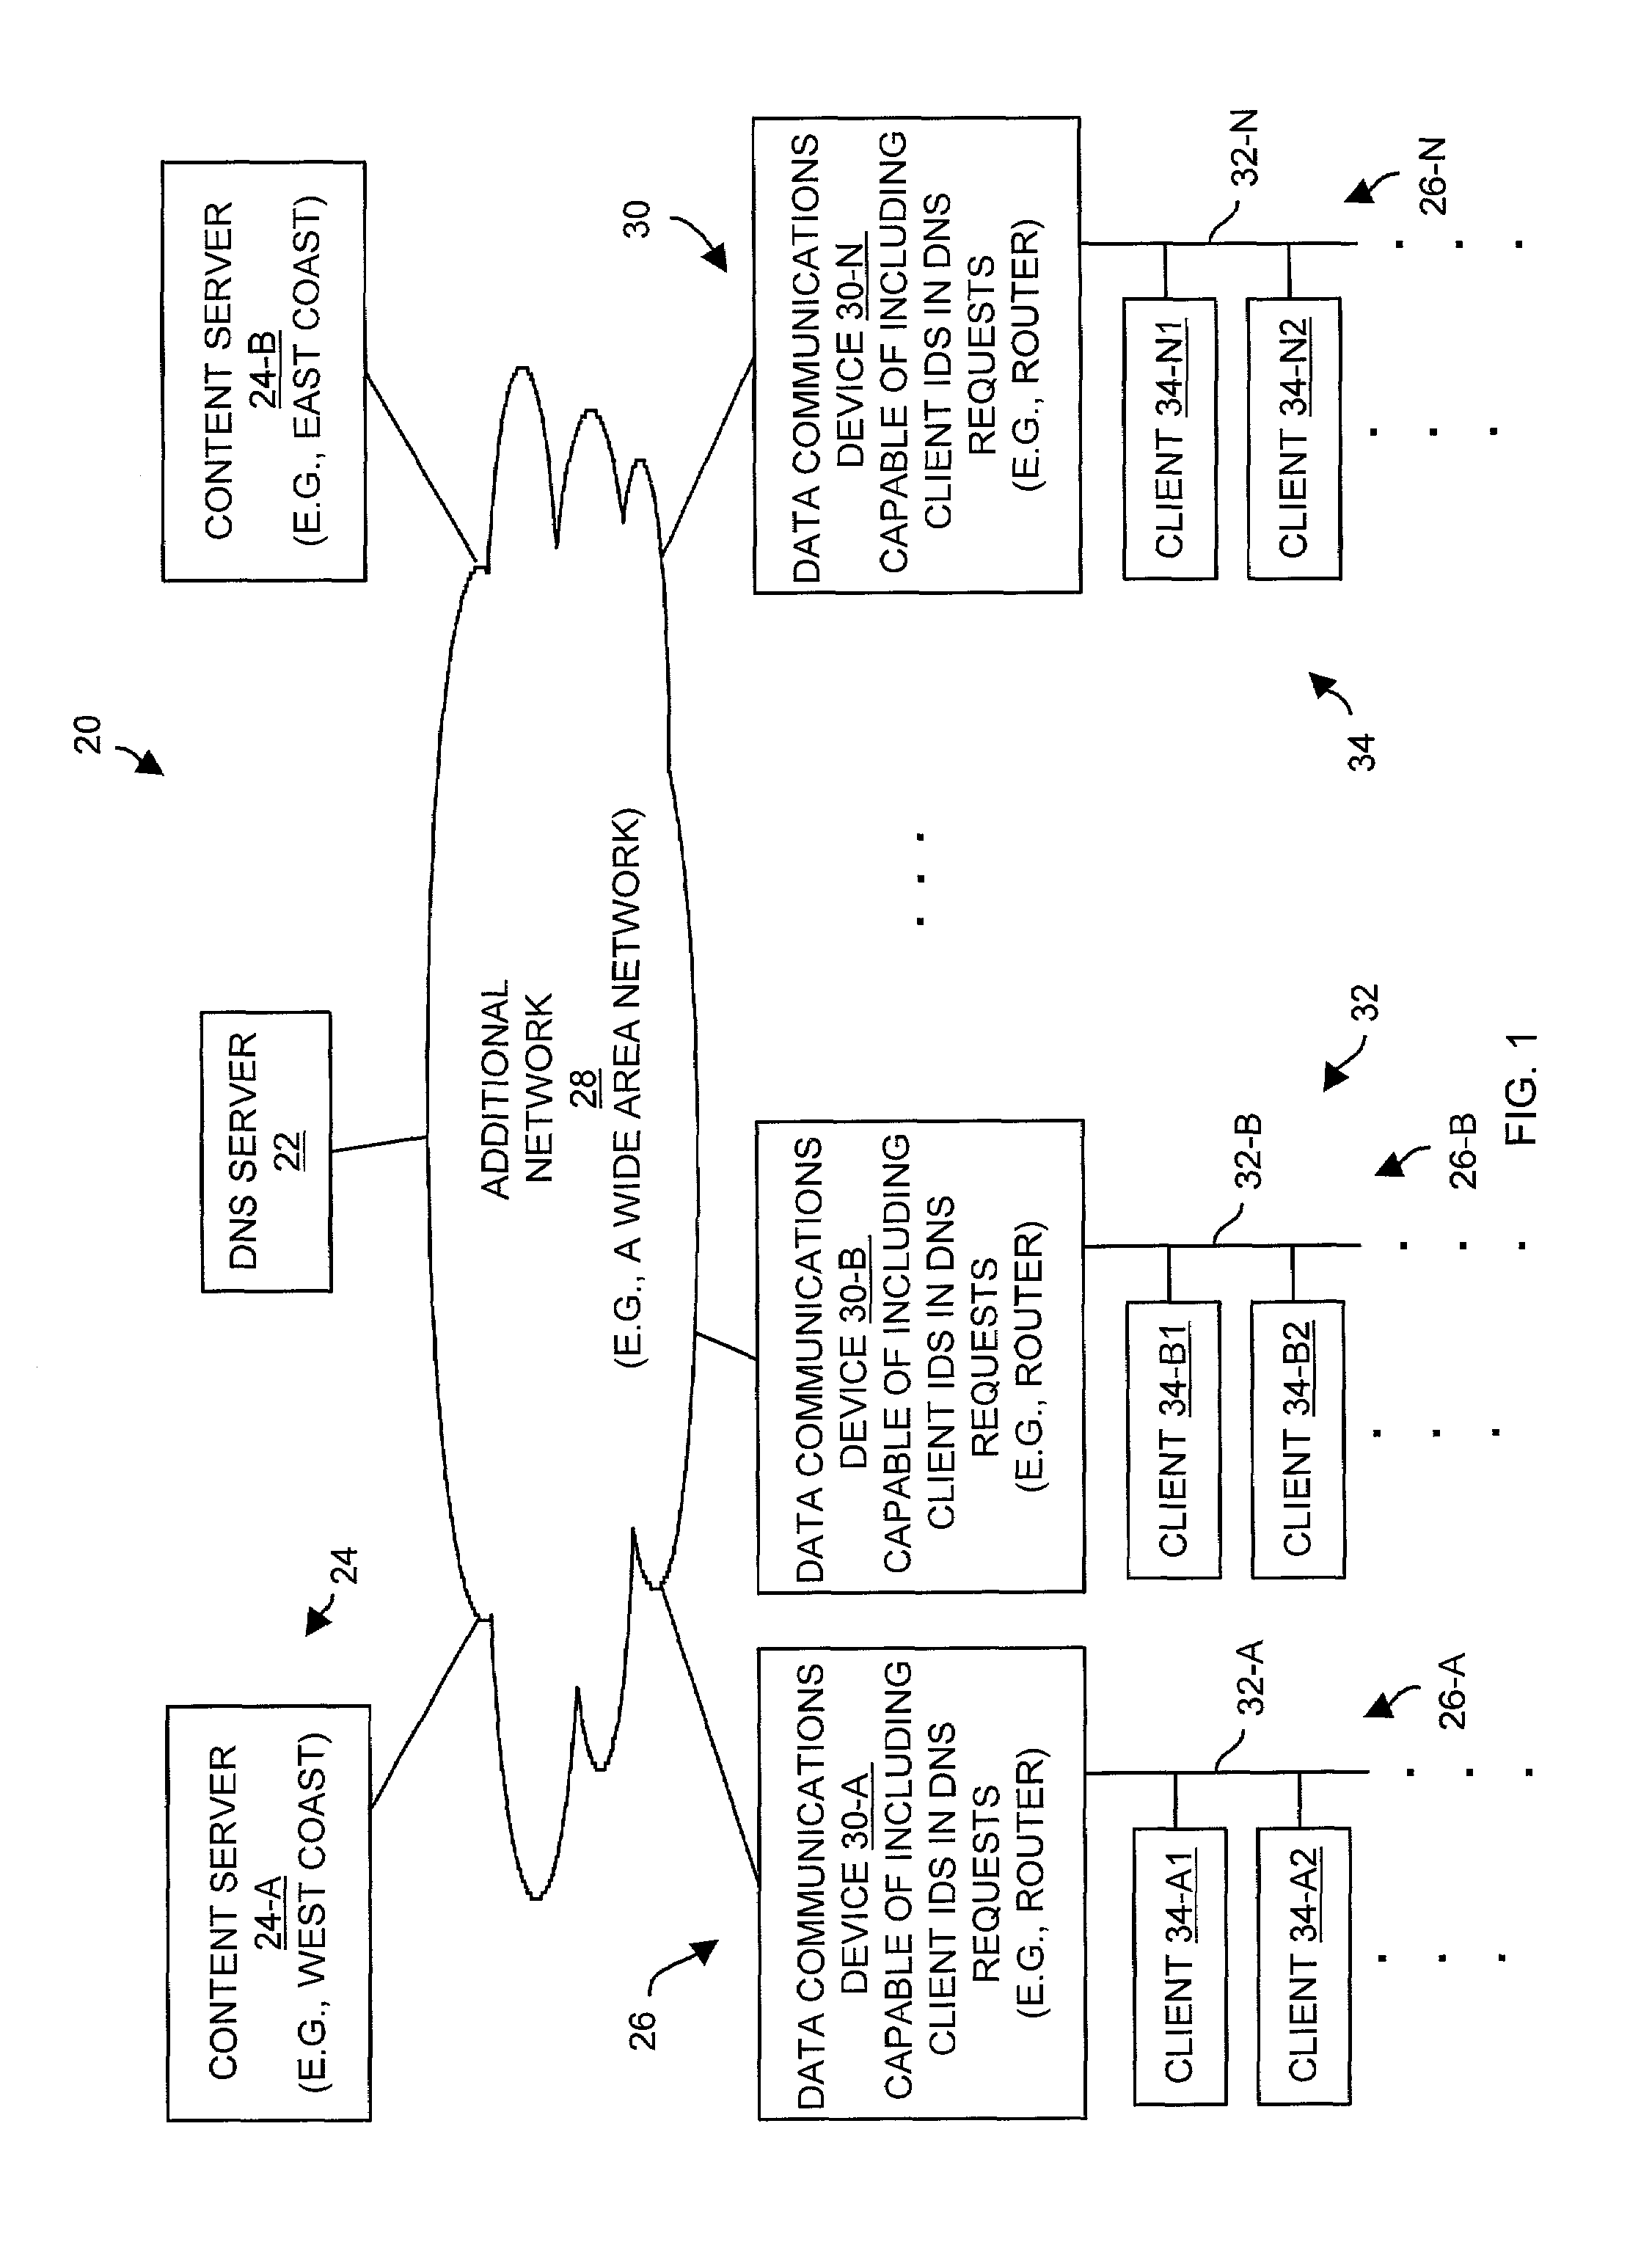 Methods and apparatus for providing domain name service based on a client identifier